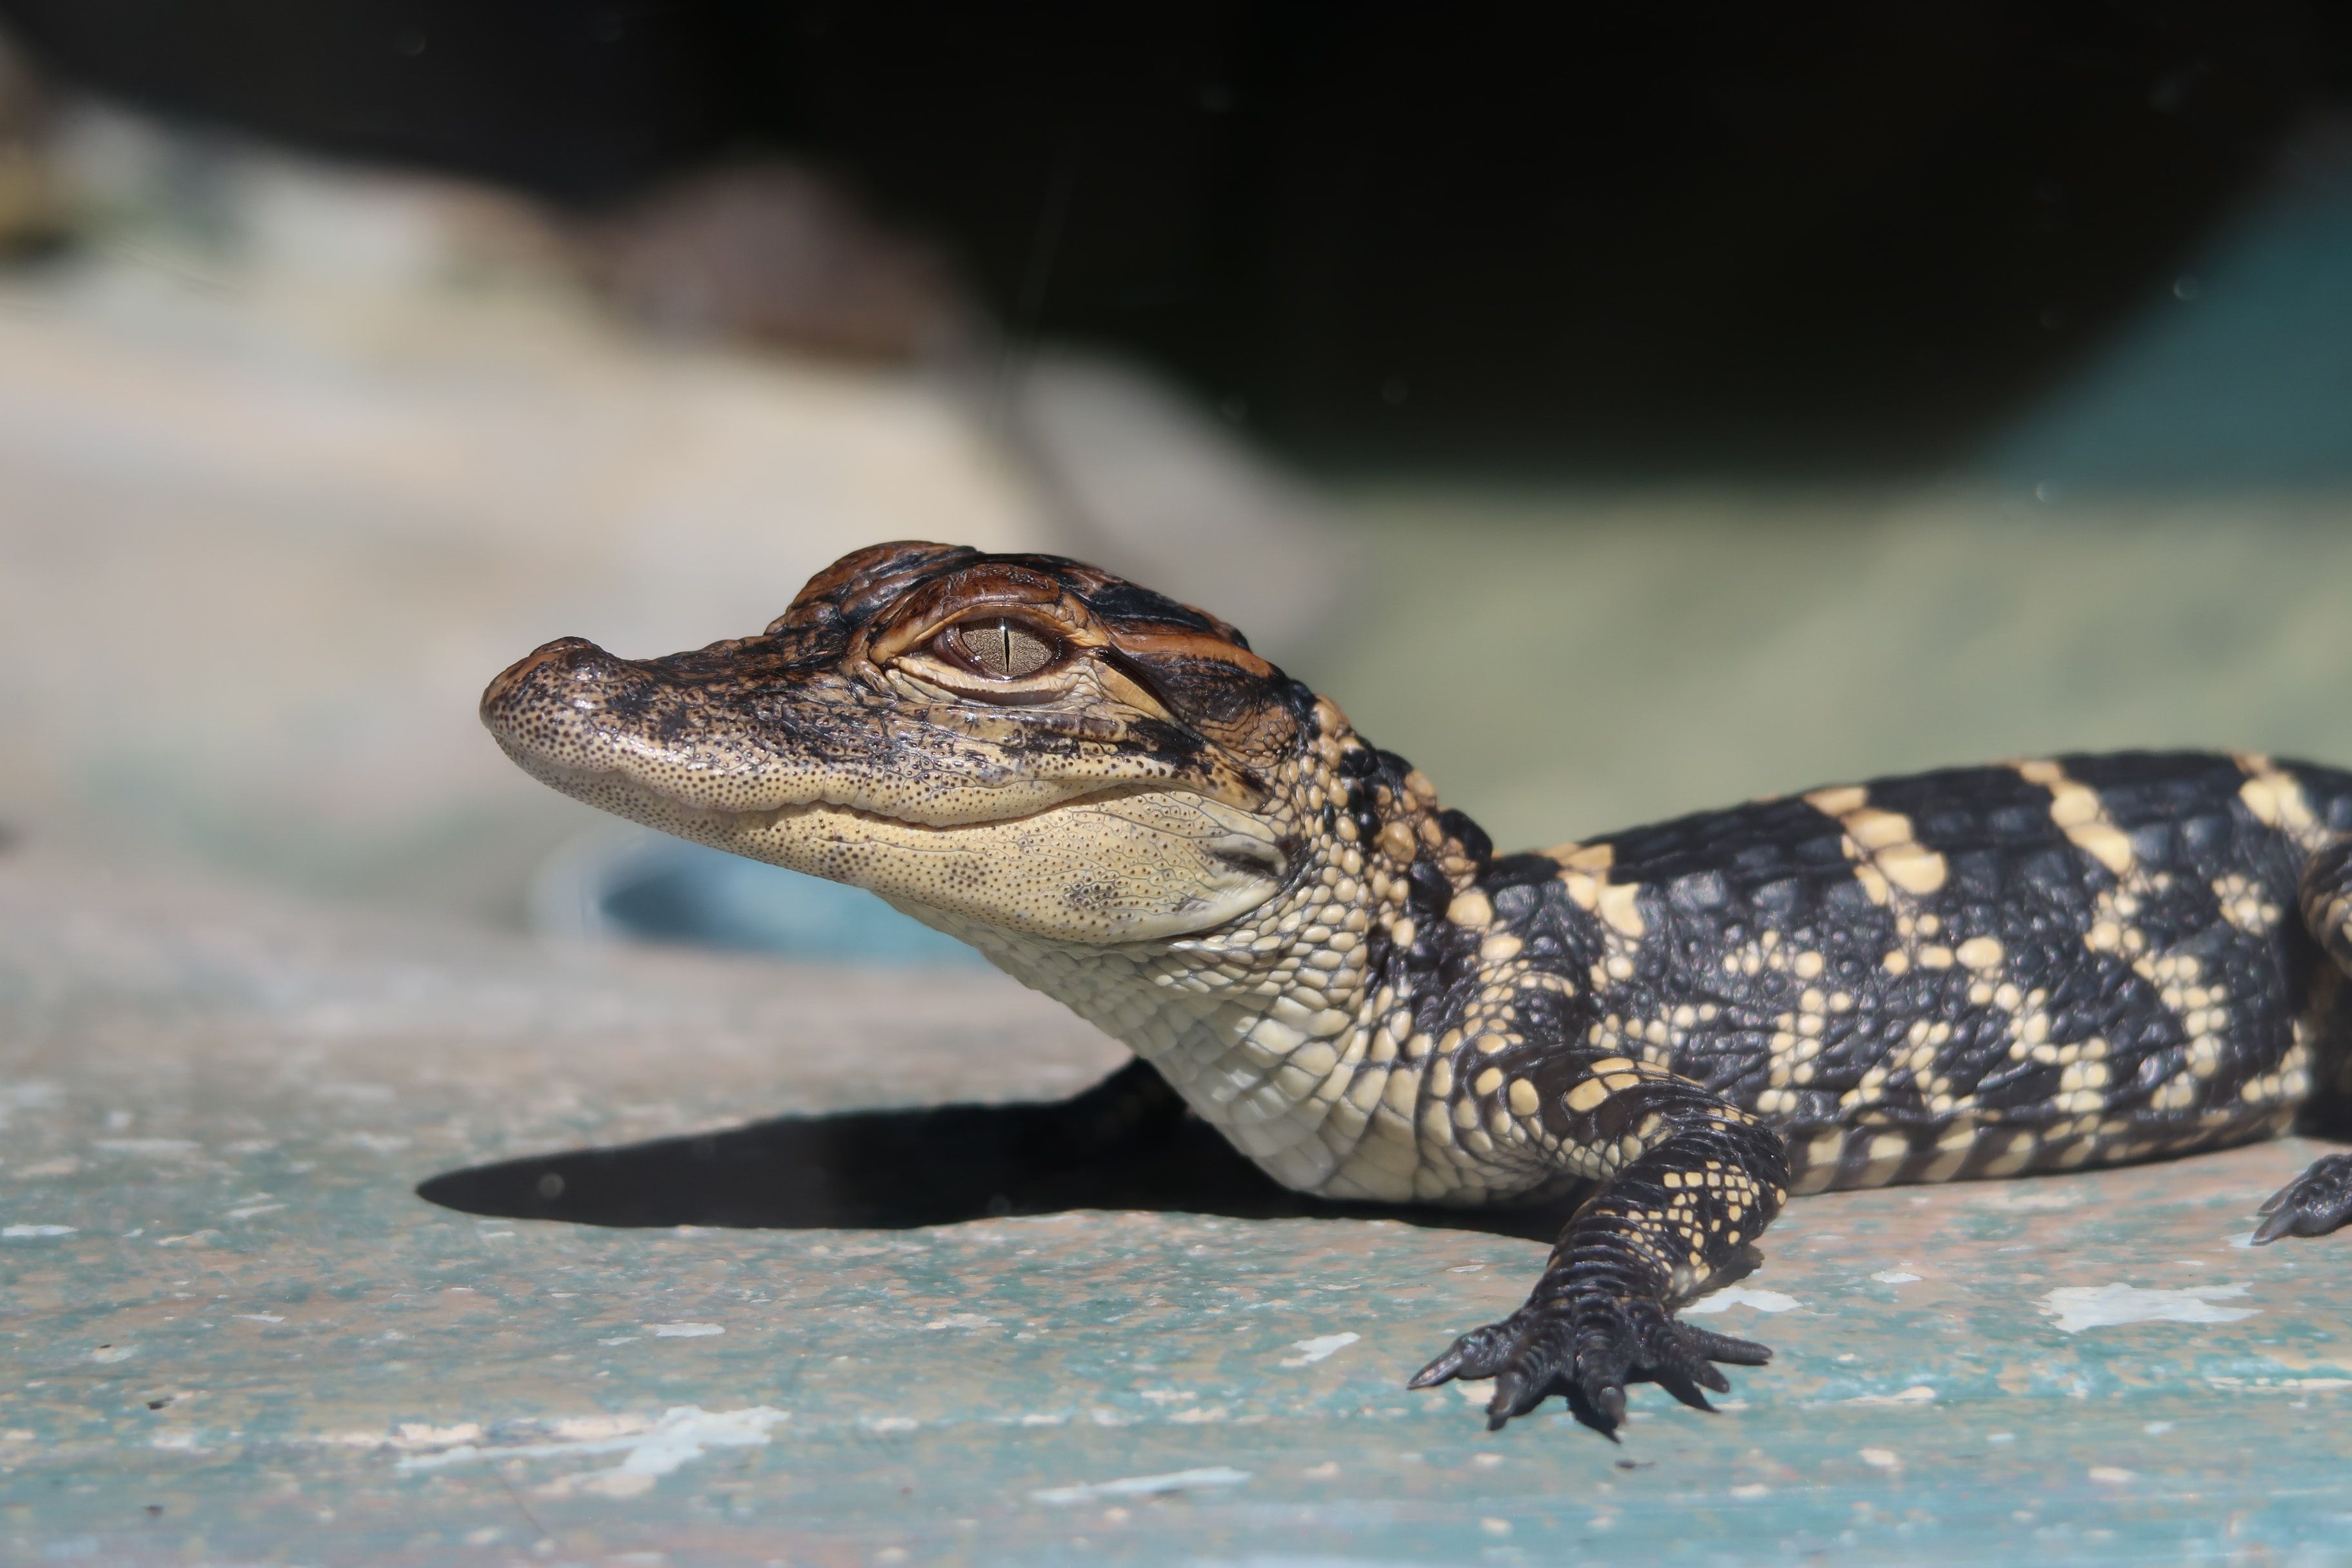 A Baby Gator In Florida